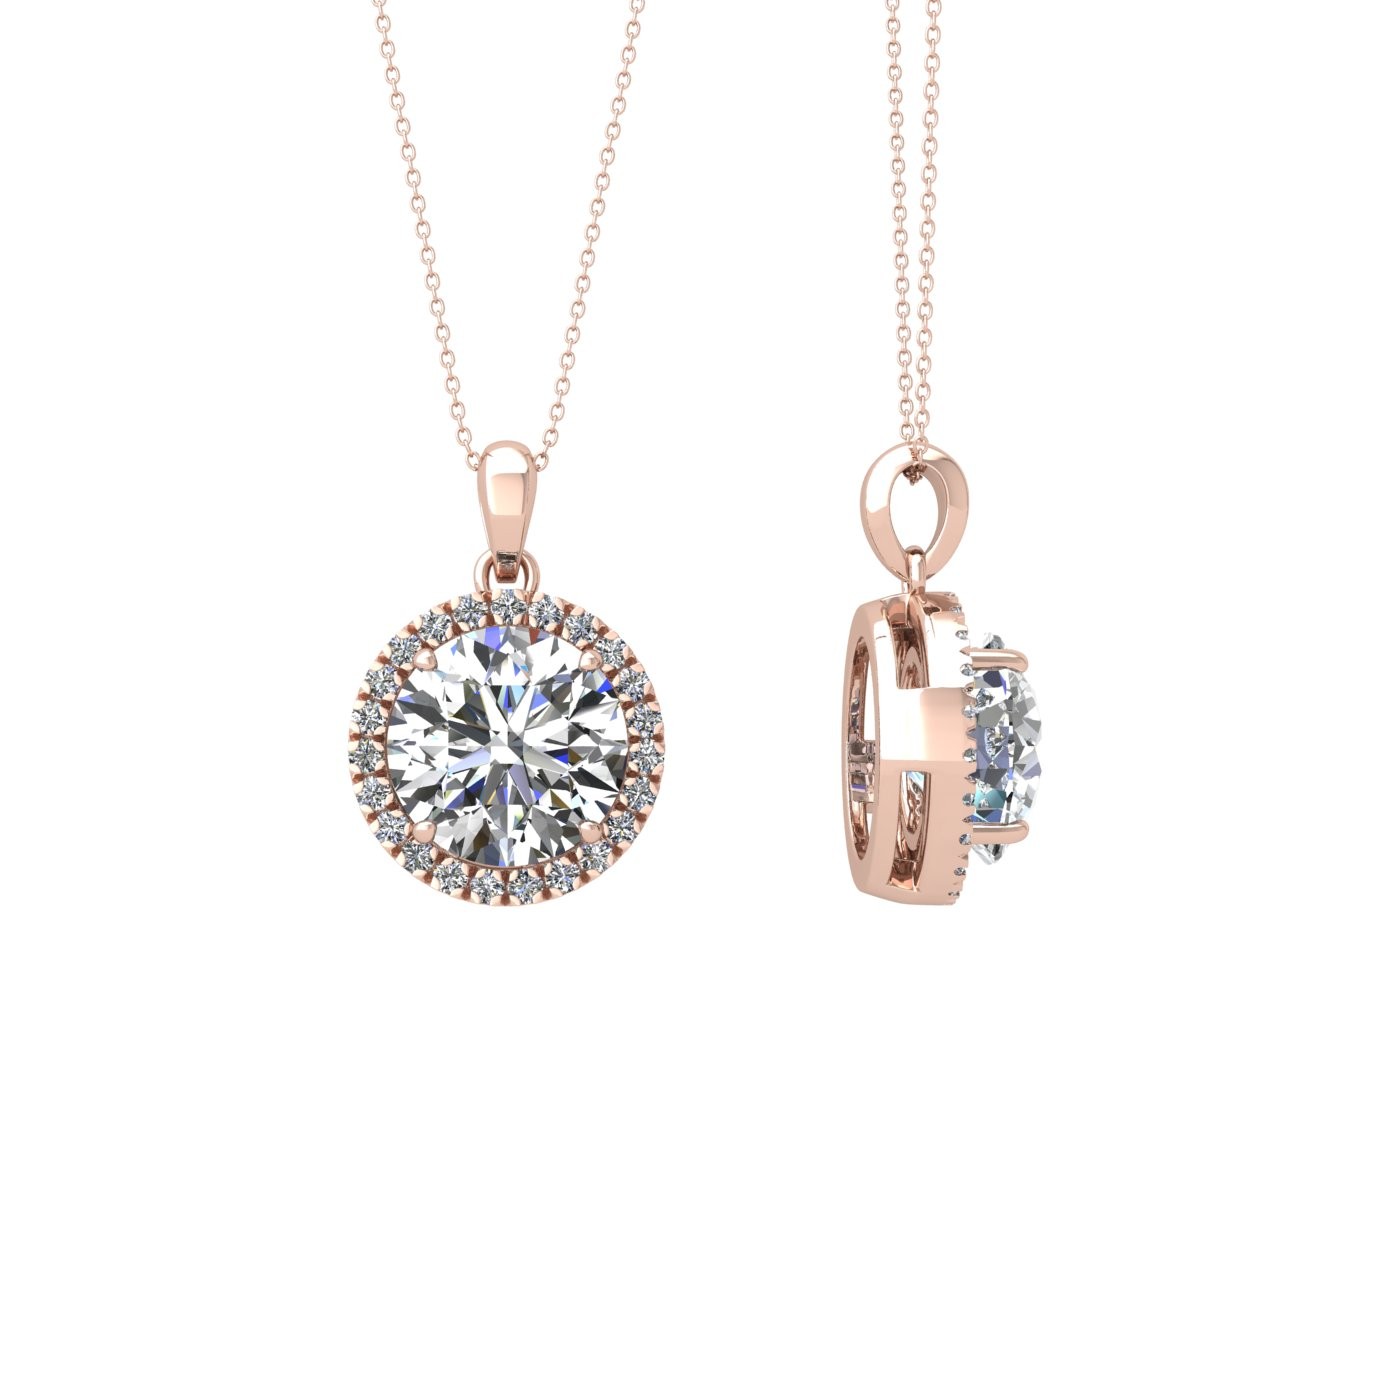 18k rose gold  2,5 ct 4 prong round shape diamond pendant with diamond pavÉ set halo including chain seperate from the pendant Photos & images